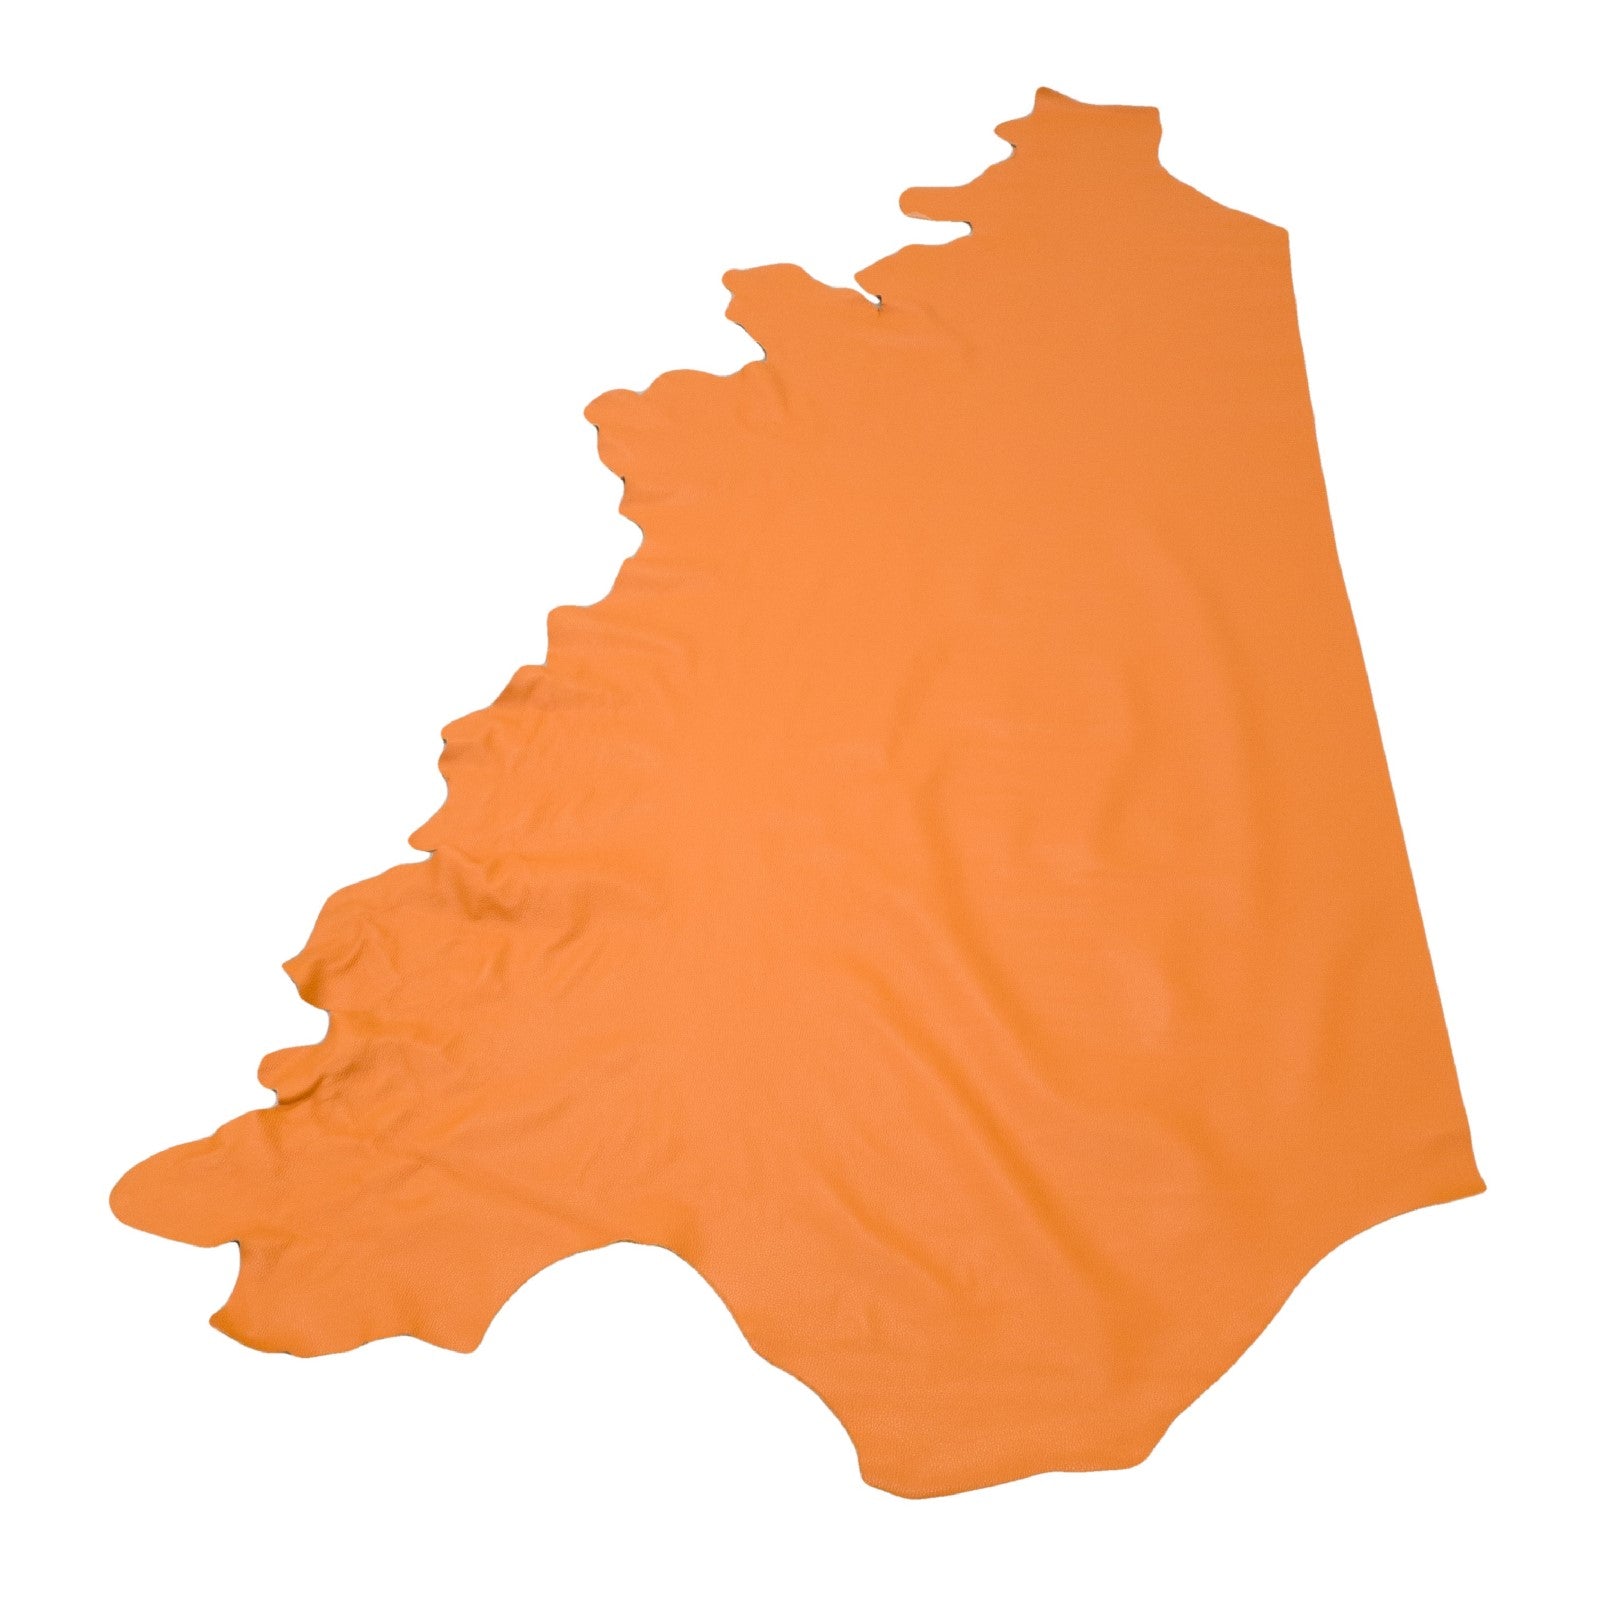 Valencia Orange, 3-4 oz Cow Hides, Tried n True, 18-20 Square Foot / Side | The Leather Guy